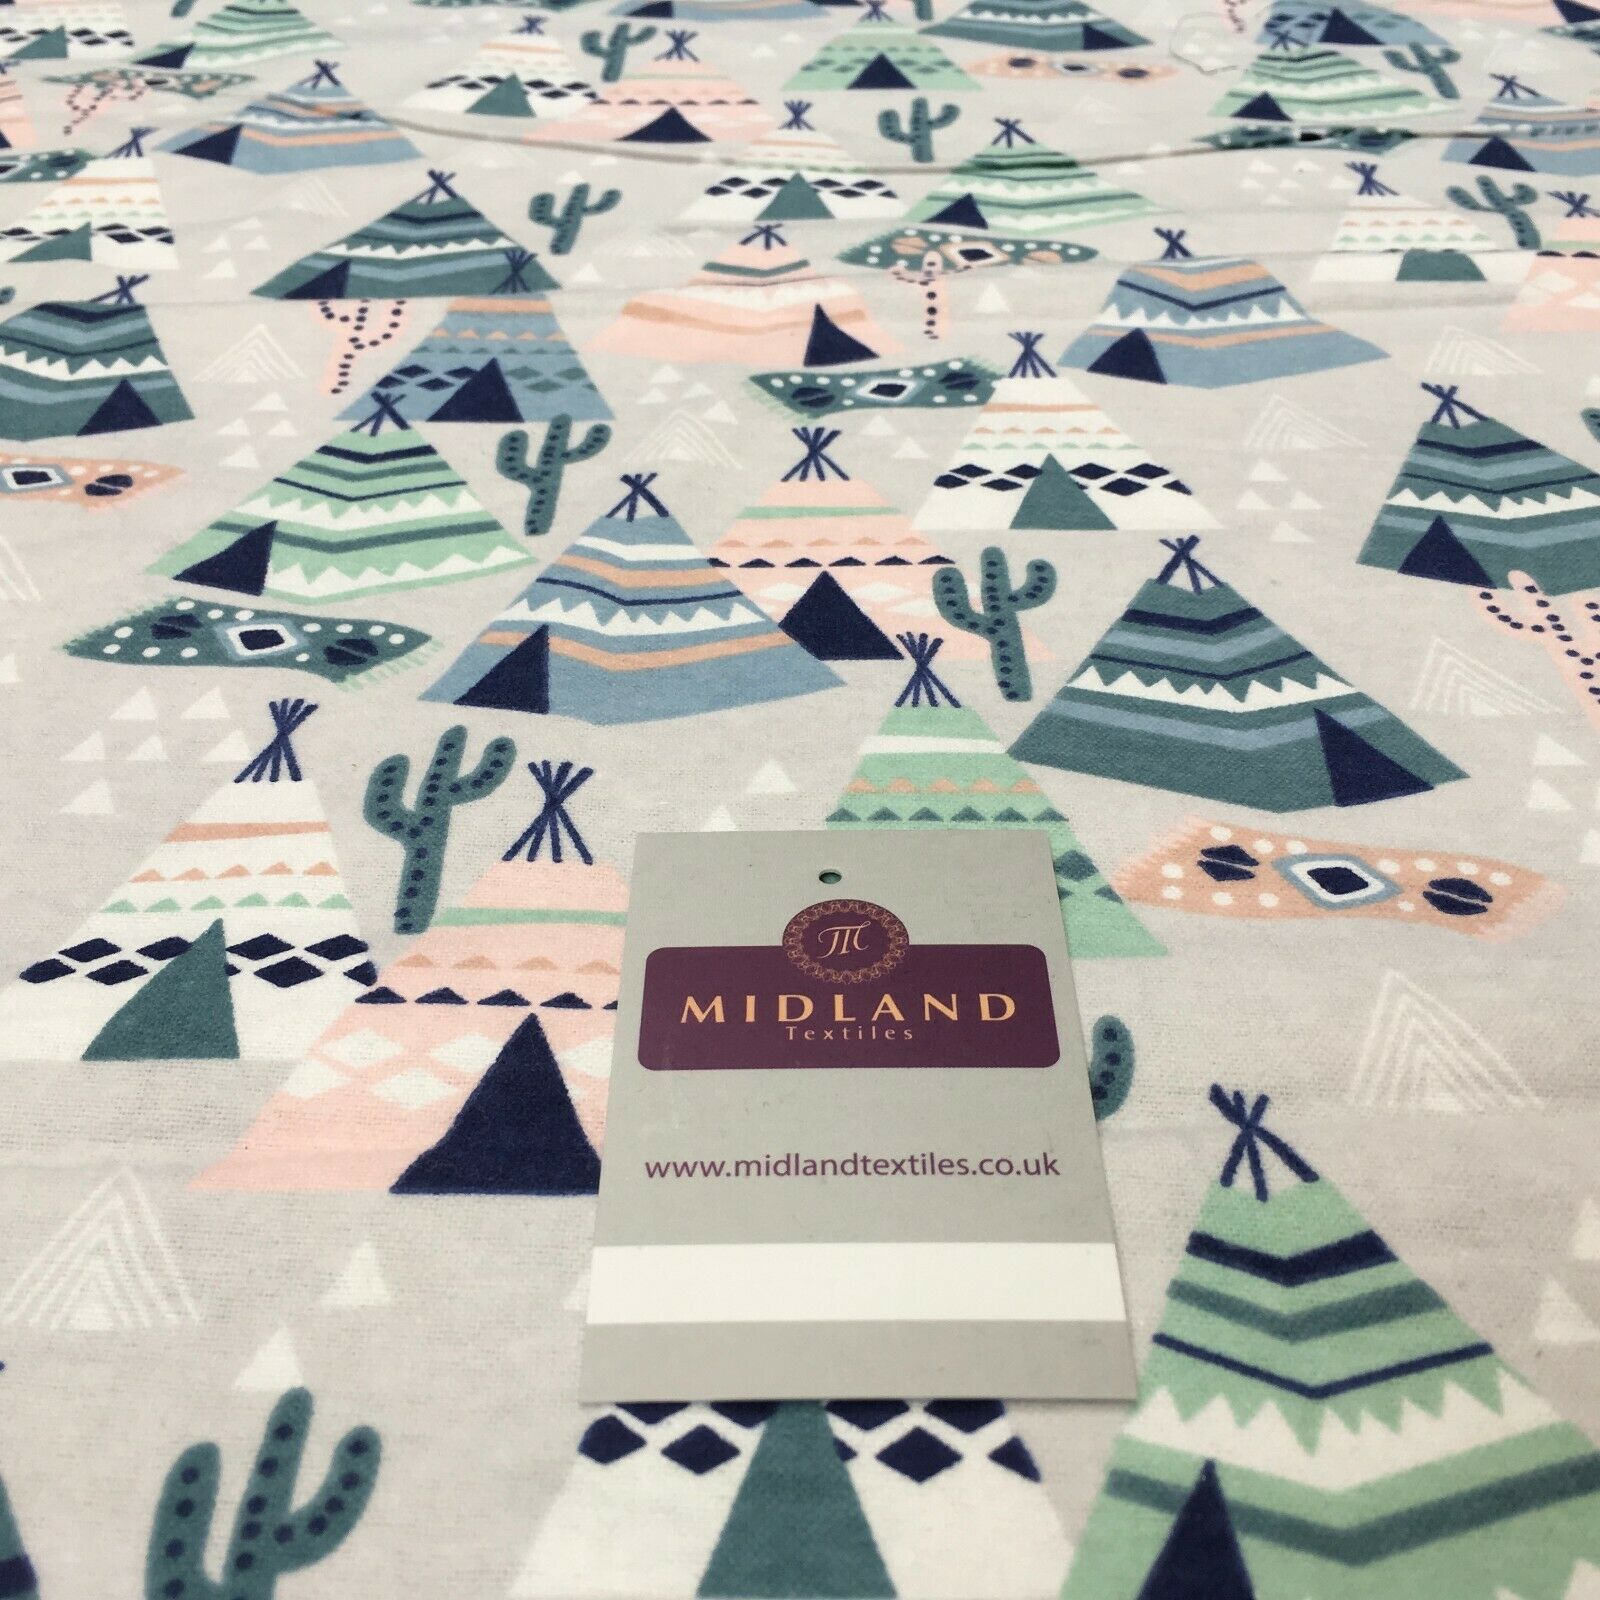 Grey Teepee tents Cotton Winceyette Soft Brushed Flannel Fabric 110cm MK1227-4